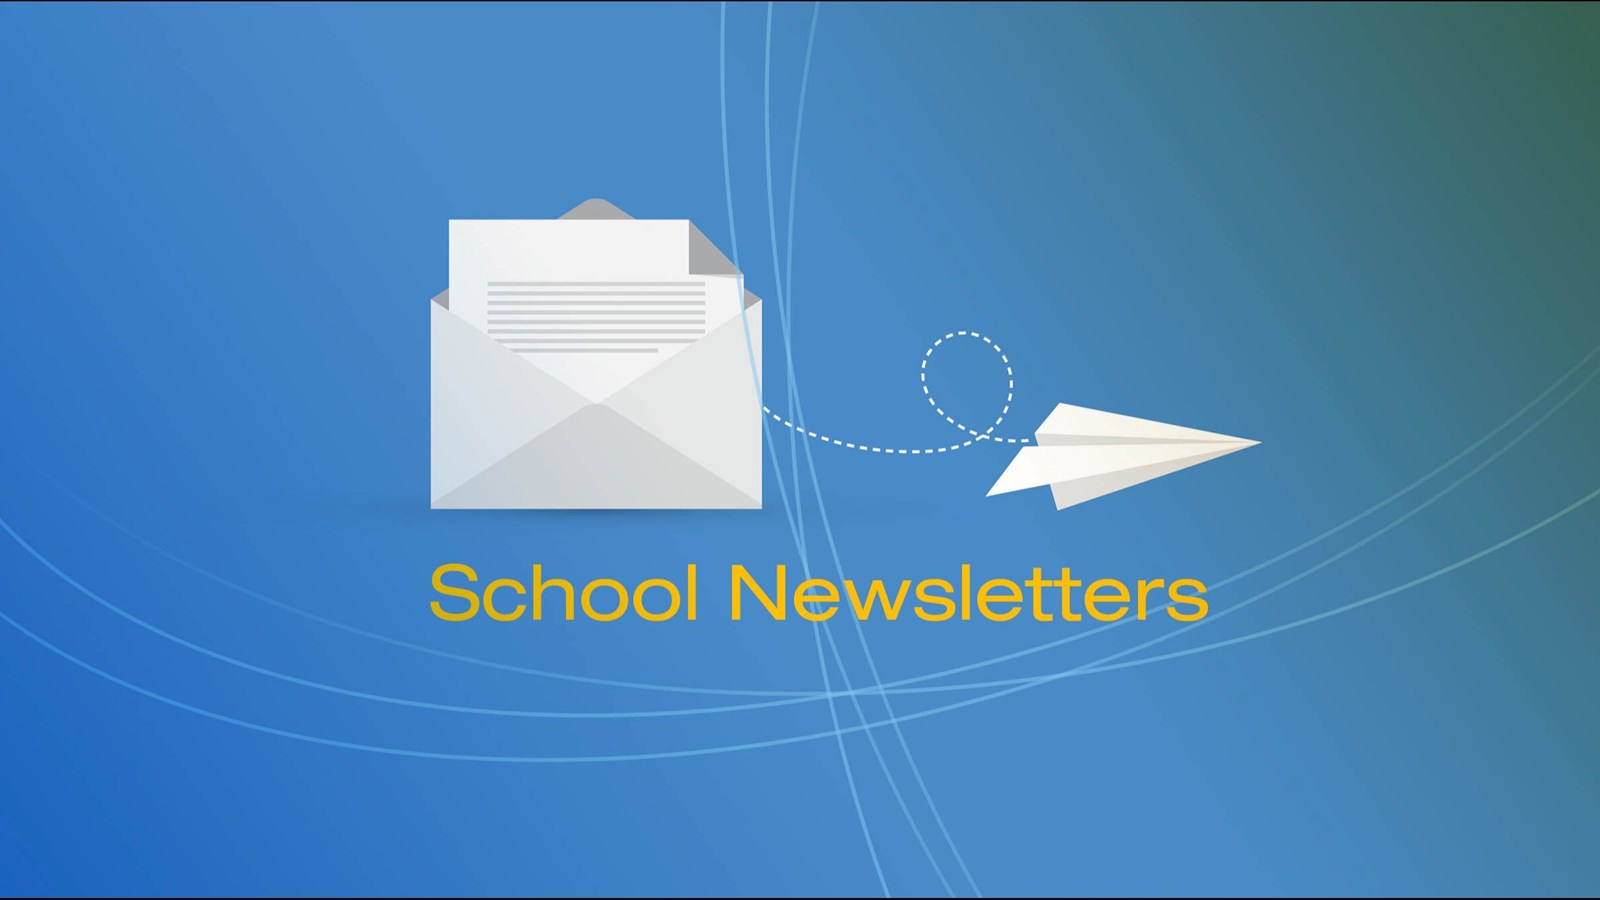 Monthly Calendar and School Newsletters